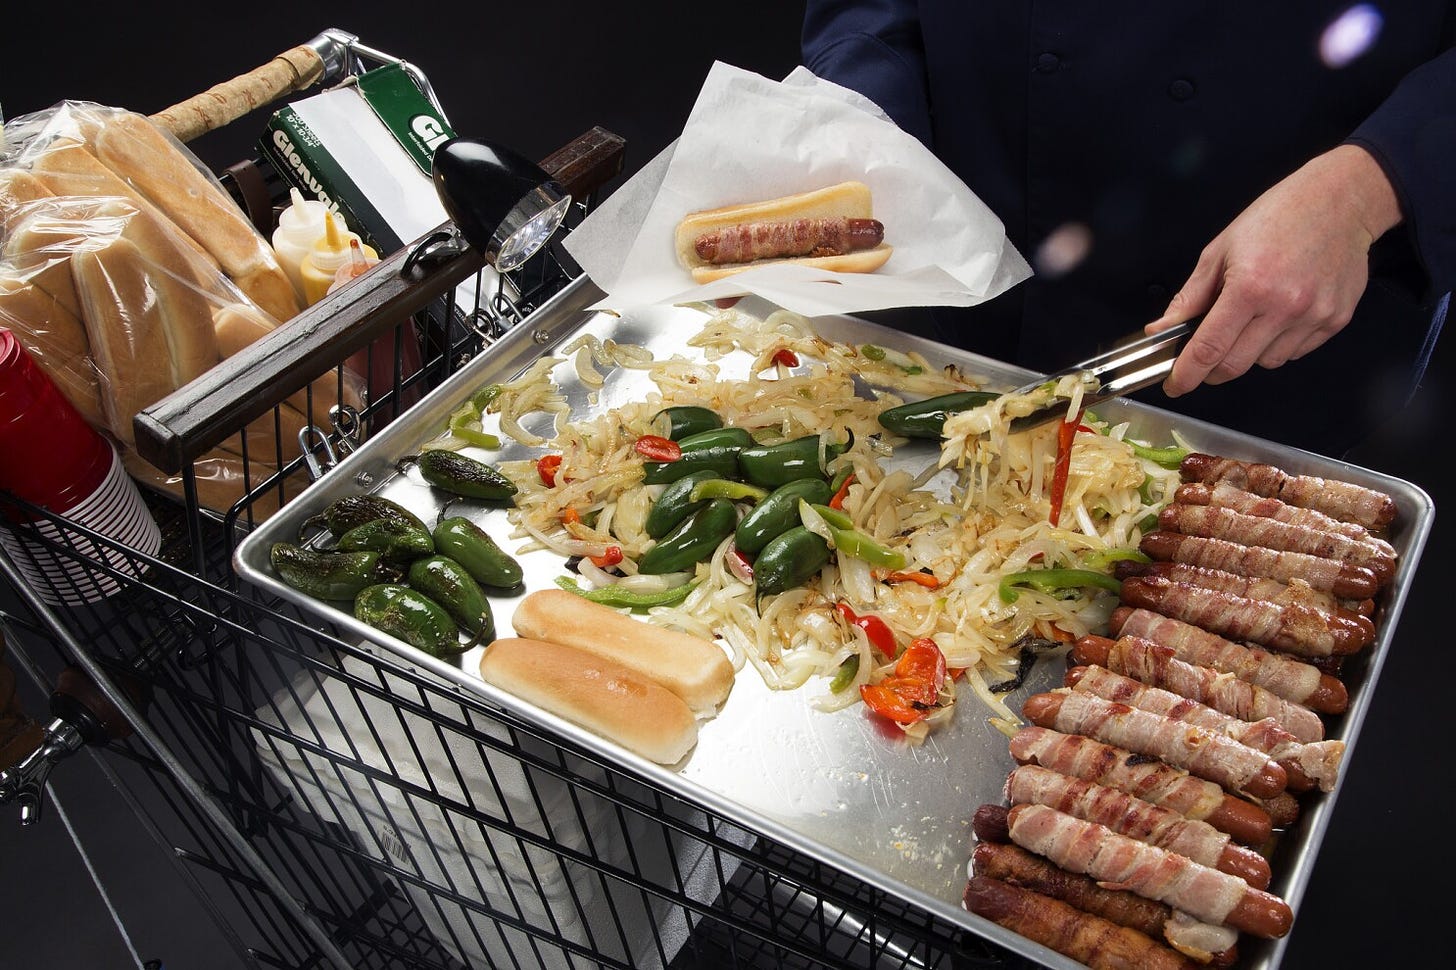 Image: A vendor grills bacon-wrapped hot dogs, peppers, and onions on a makeshift grill made out of a shopping cart